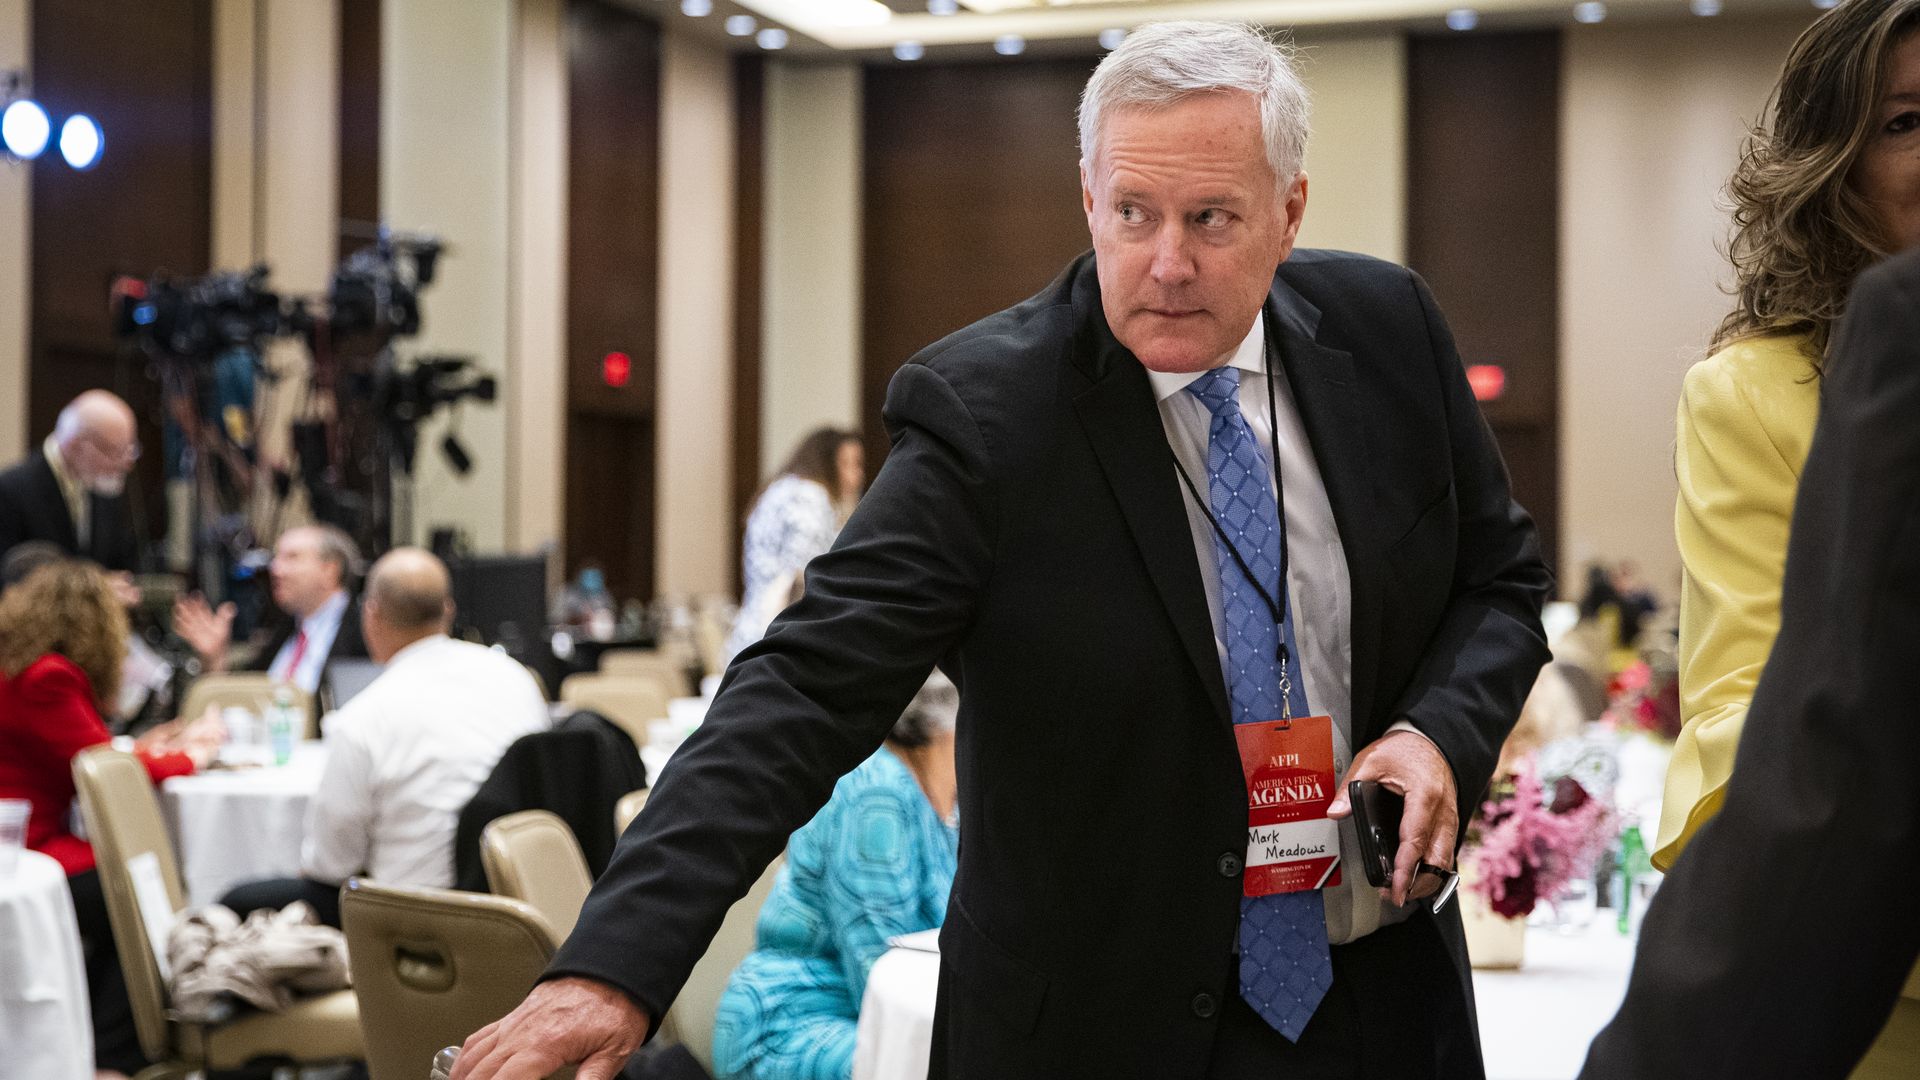 Mark Meadows, former White House chief of staff, arrives during the America First Policy Institute's America First Agenda summit in Washington, D.C., US, on Monday, July 25, 2022. 